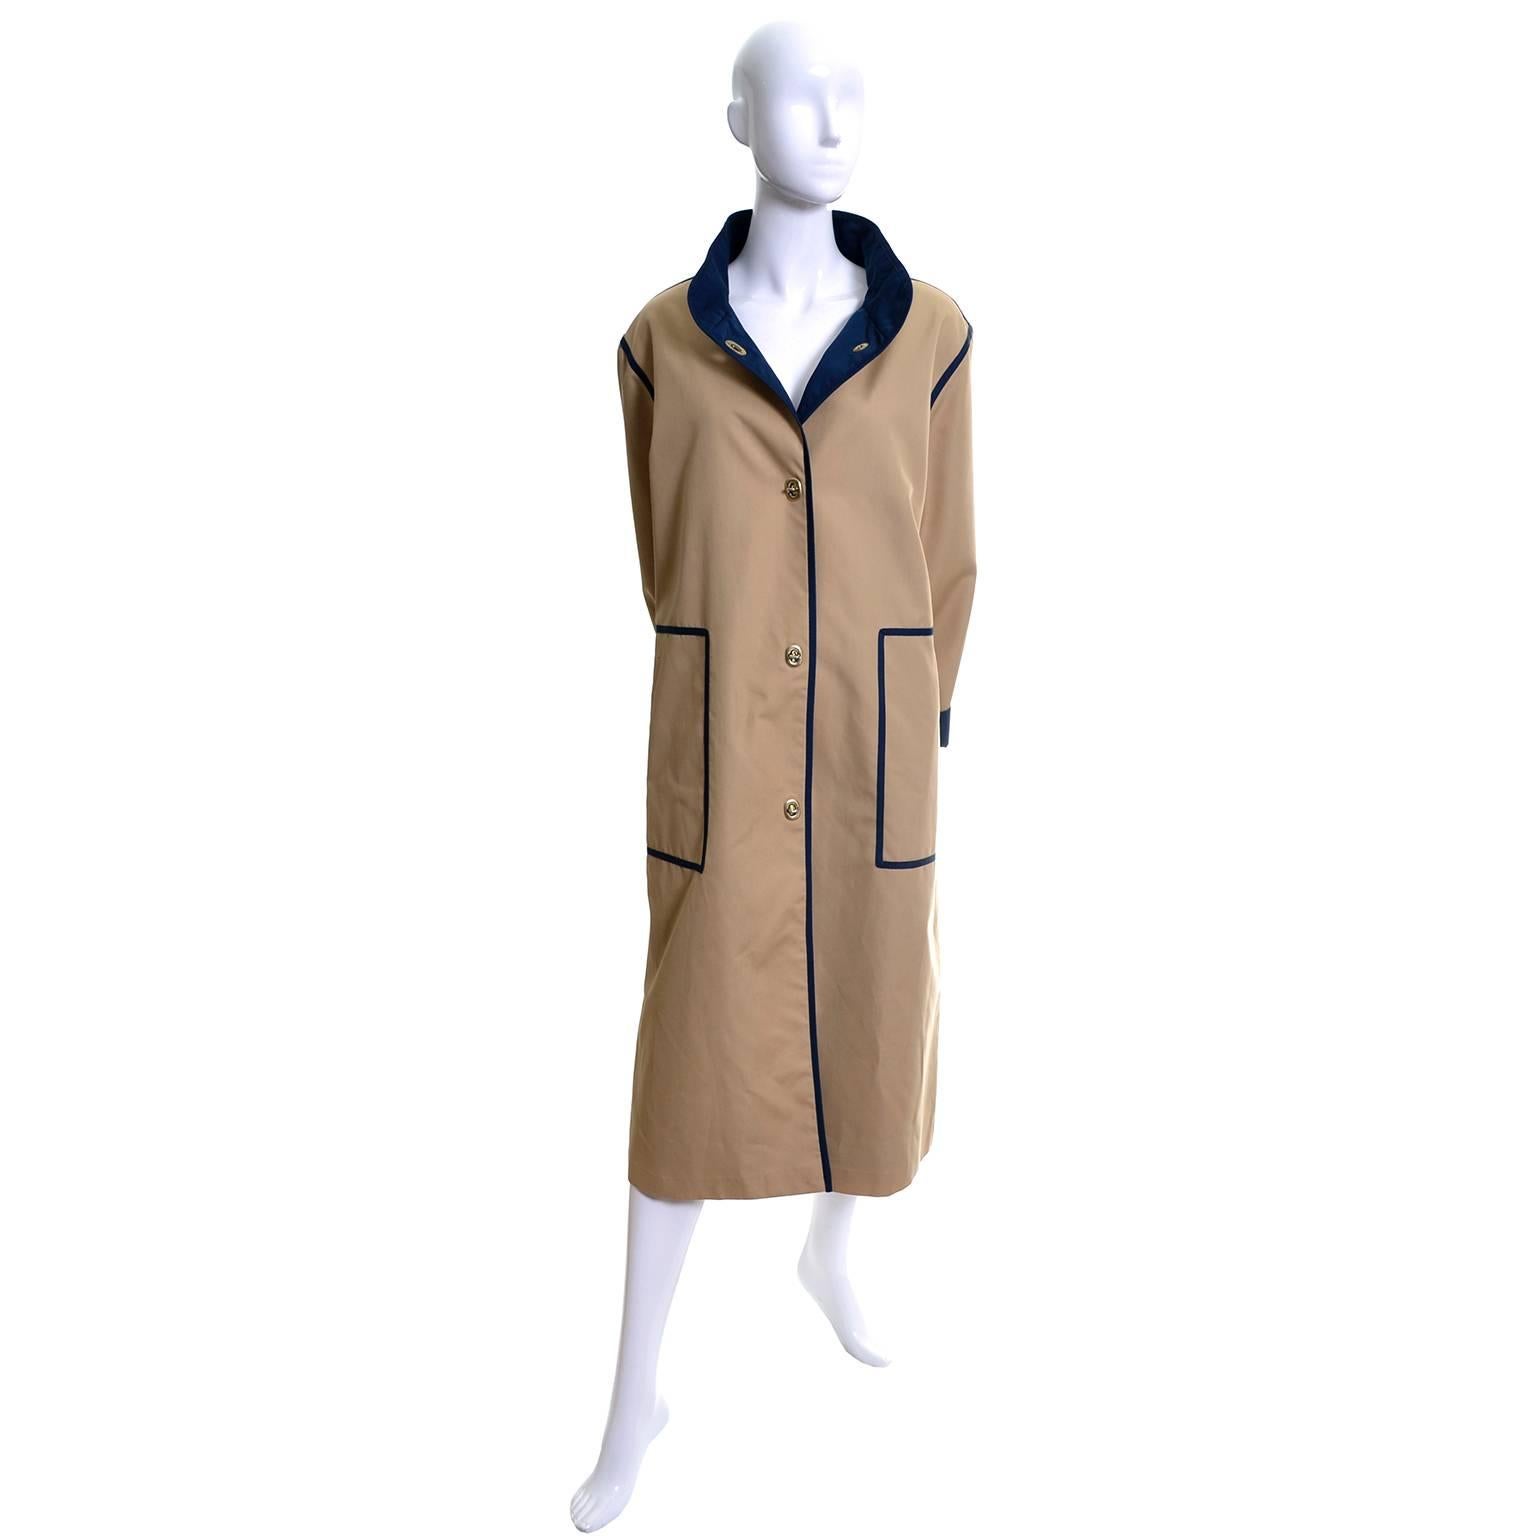 This is a vintage 1970's Bonnie Cashin raincoat with the Weatherwear for Russ Taylor label.  Bonnie Cashin always designed her garments and did not license her name or use design assistants.  She was a revolutionary designer who is credited with